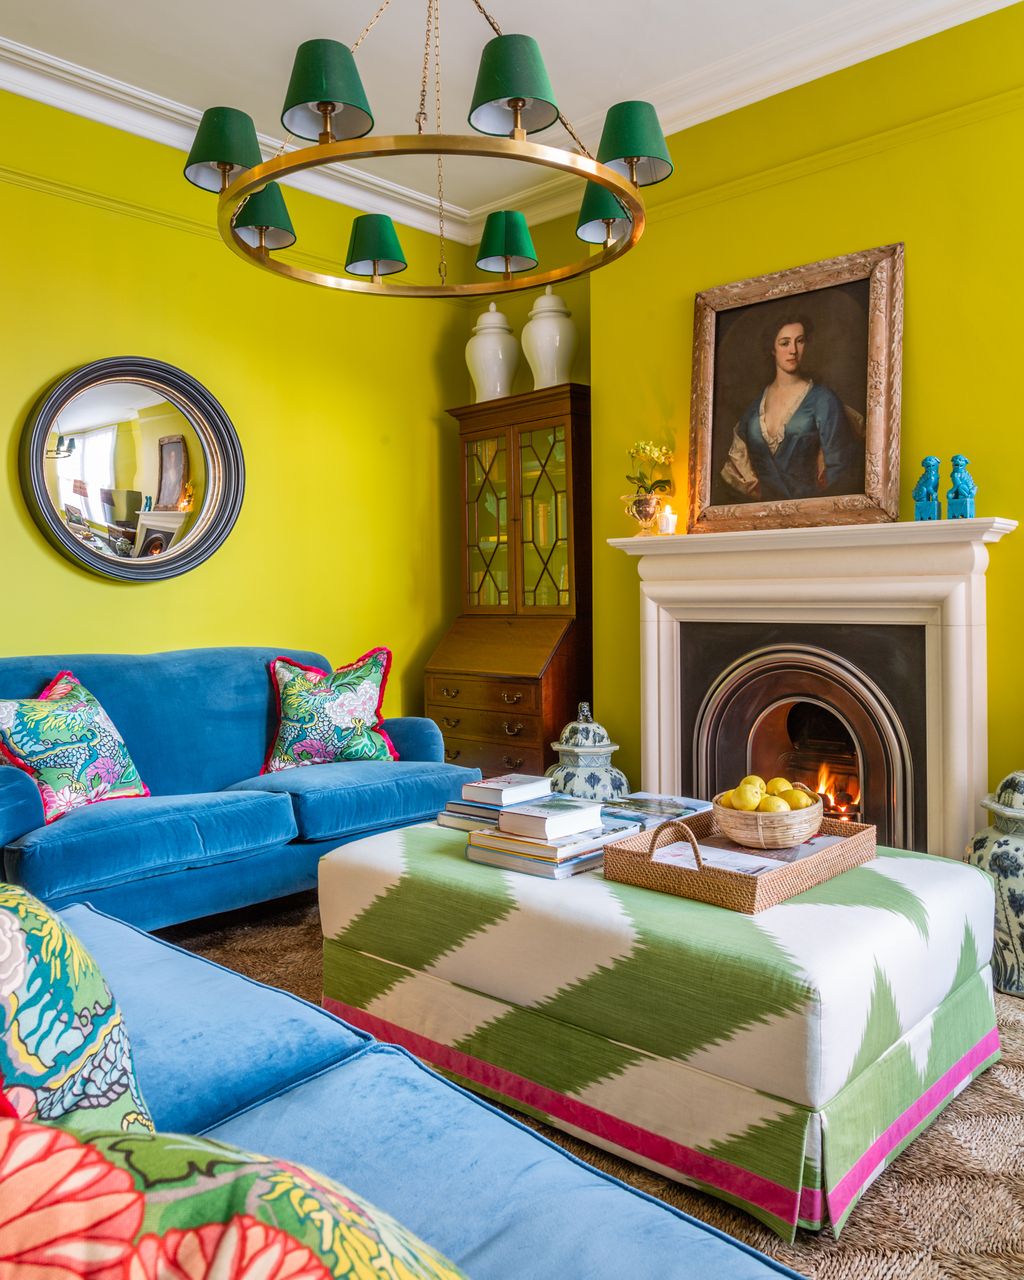 Explore a wild, maximalist Victorian townhouse near the sea in Somerset ...